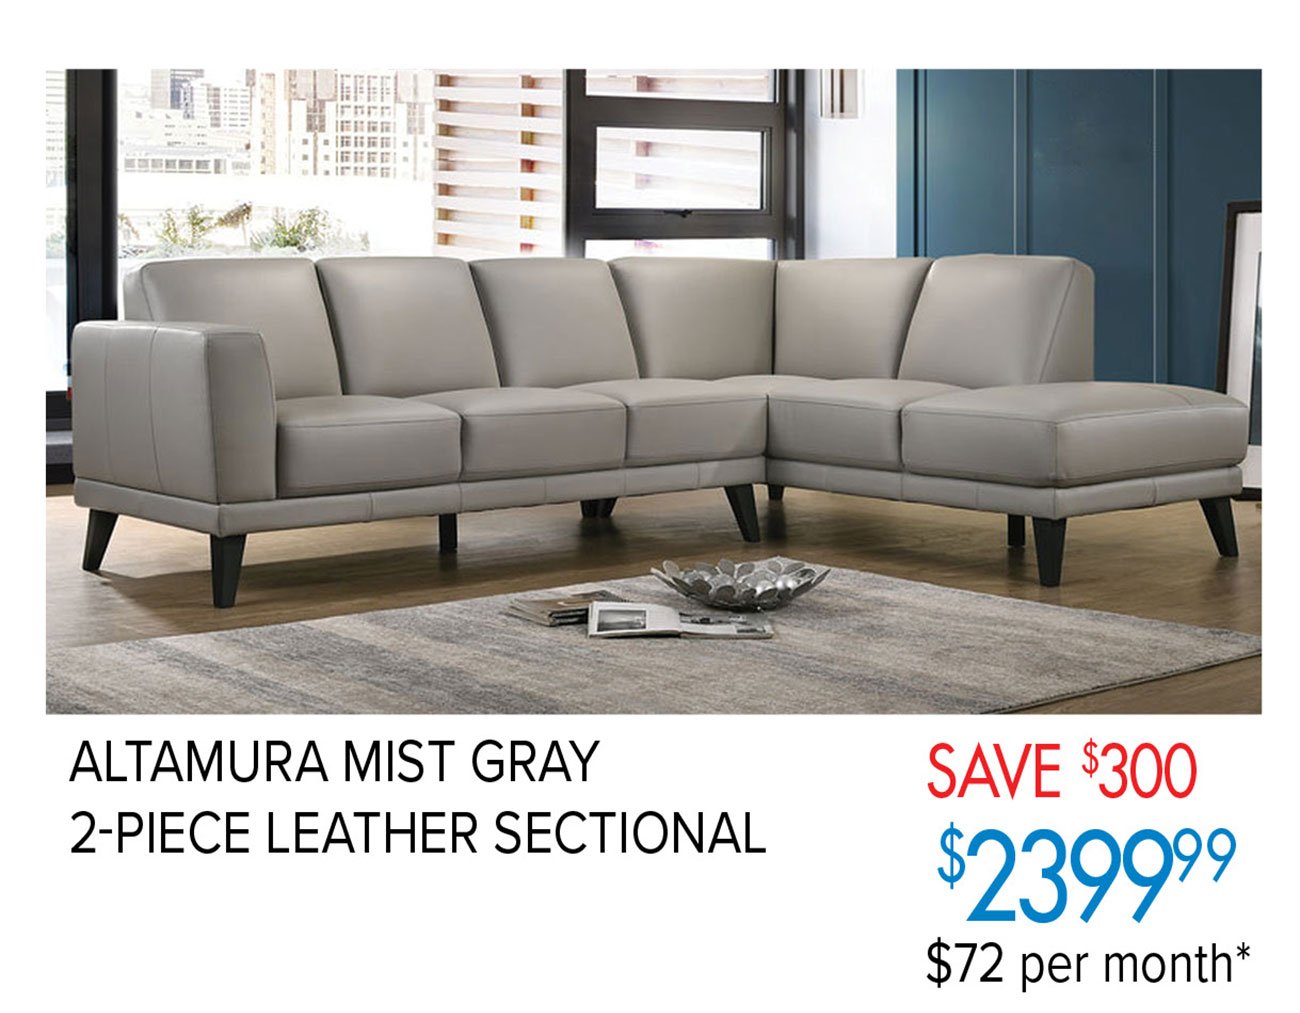  ALTAMURA MIST GRAY 2-PIECE LEATHER SECTIONAL 5939999 $72 per month* 